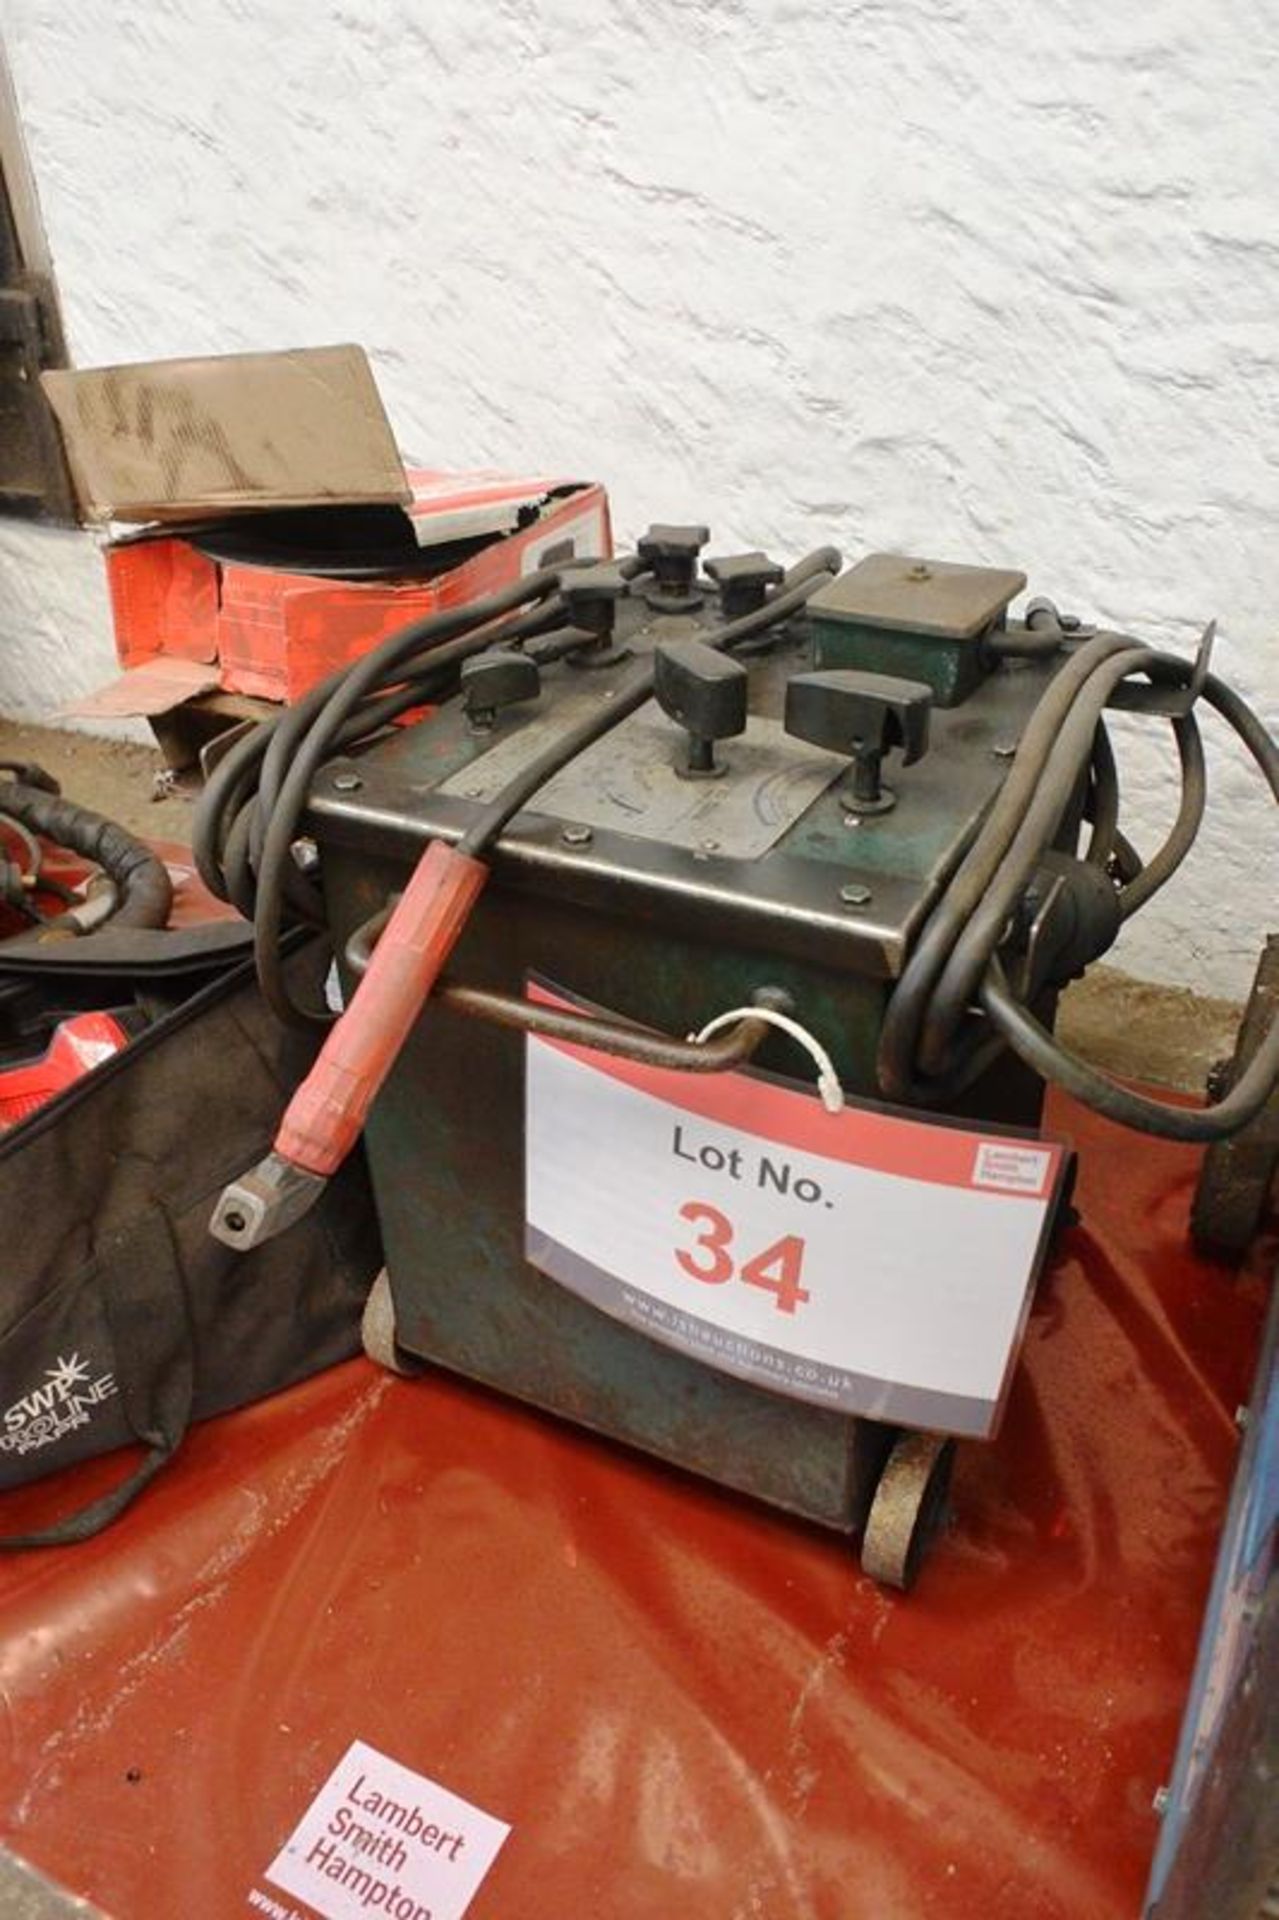 Olympic 225 amp oil cooled arc welding set, model WT-225 (Recommended collection period for this lot